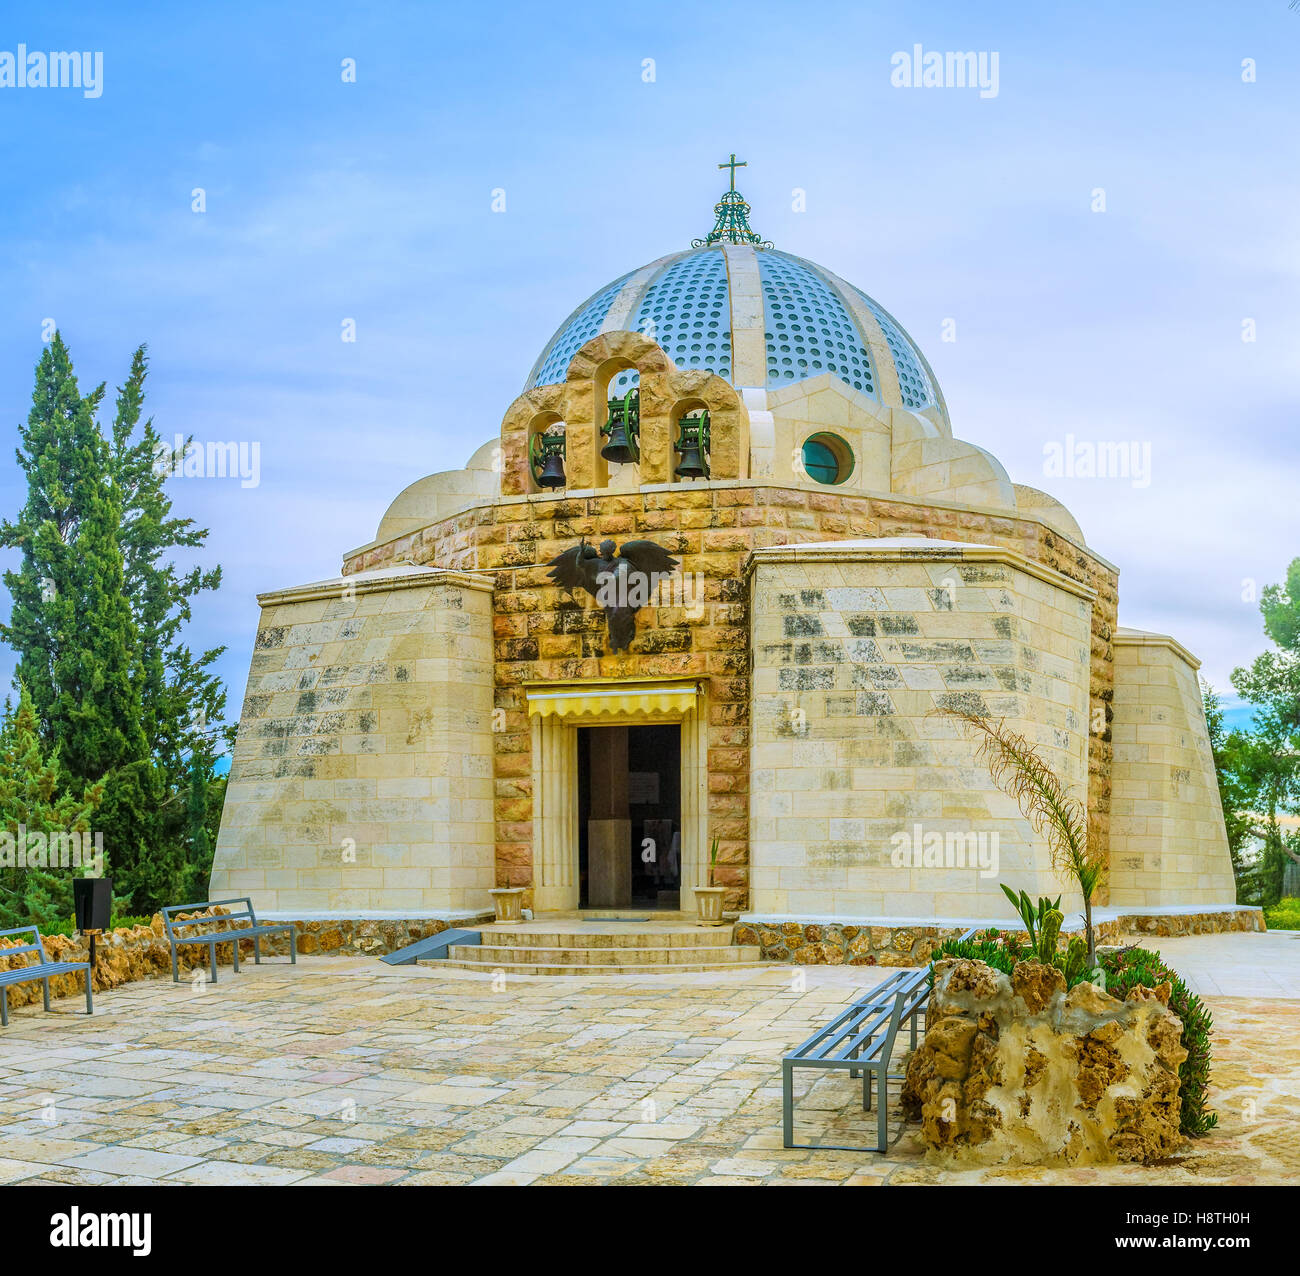 The modern Shepherds Field Chapel was built on the foundation of destroyed medieval church, Bethlehem, Palestine, Israel. Stock Photo